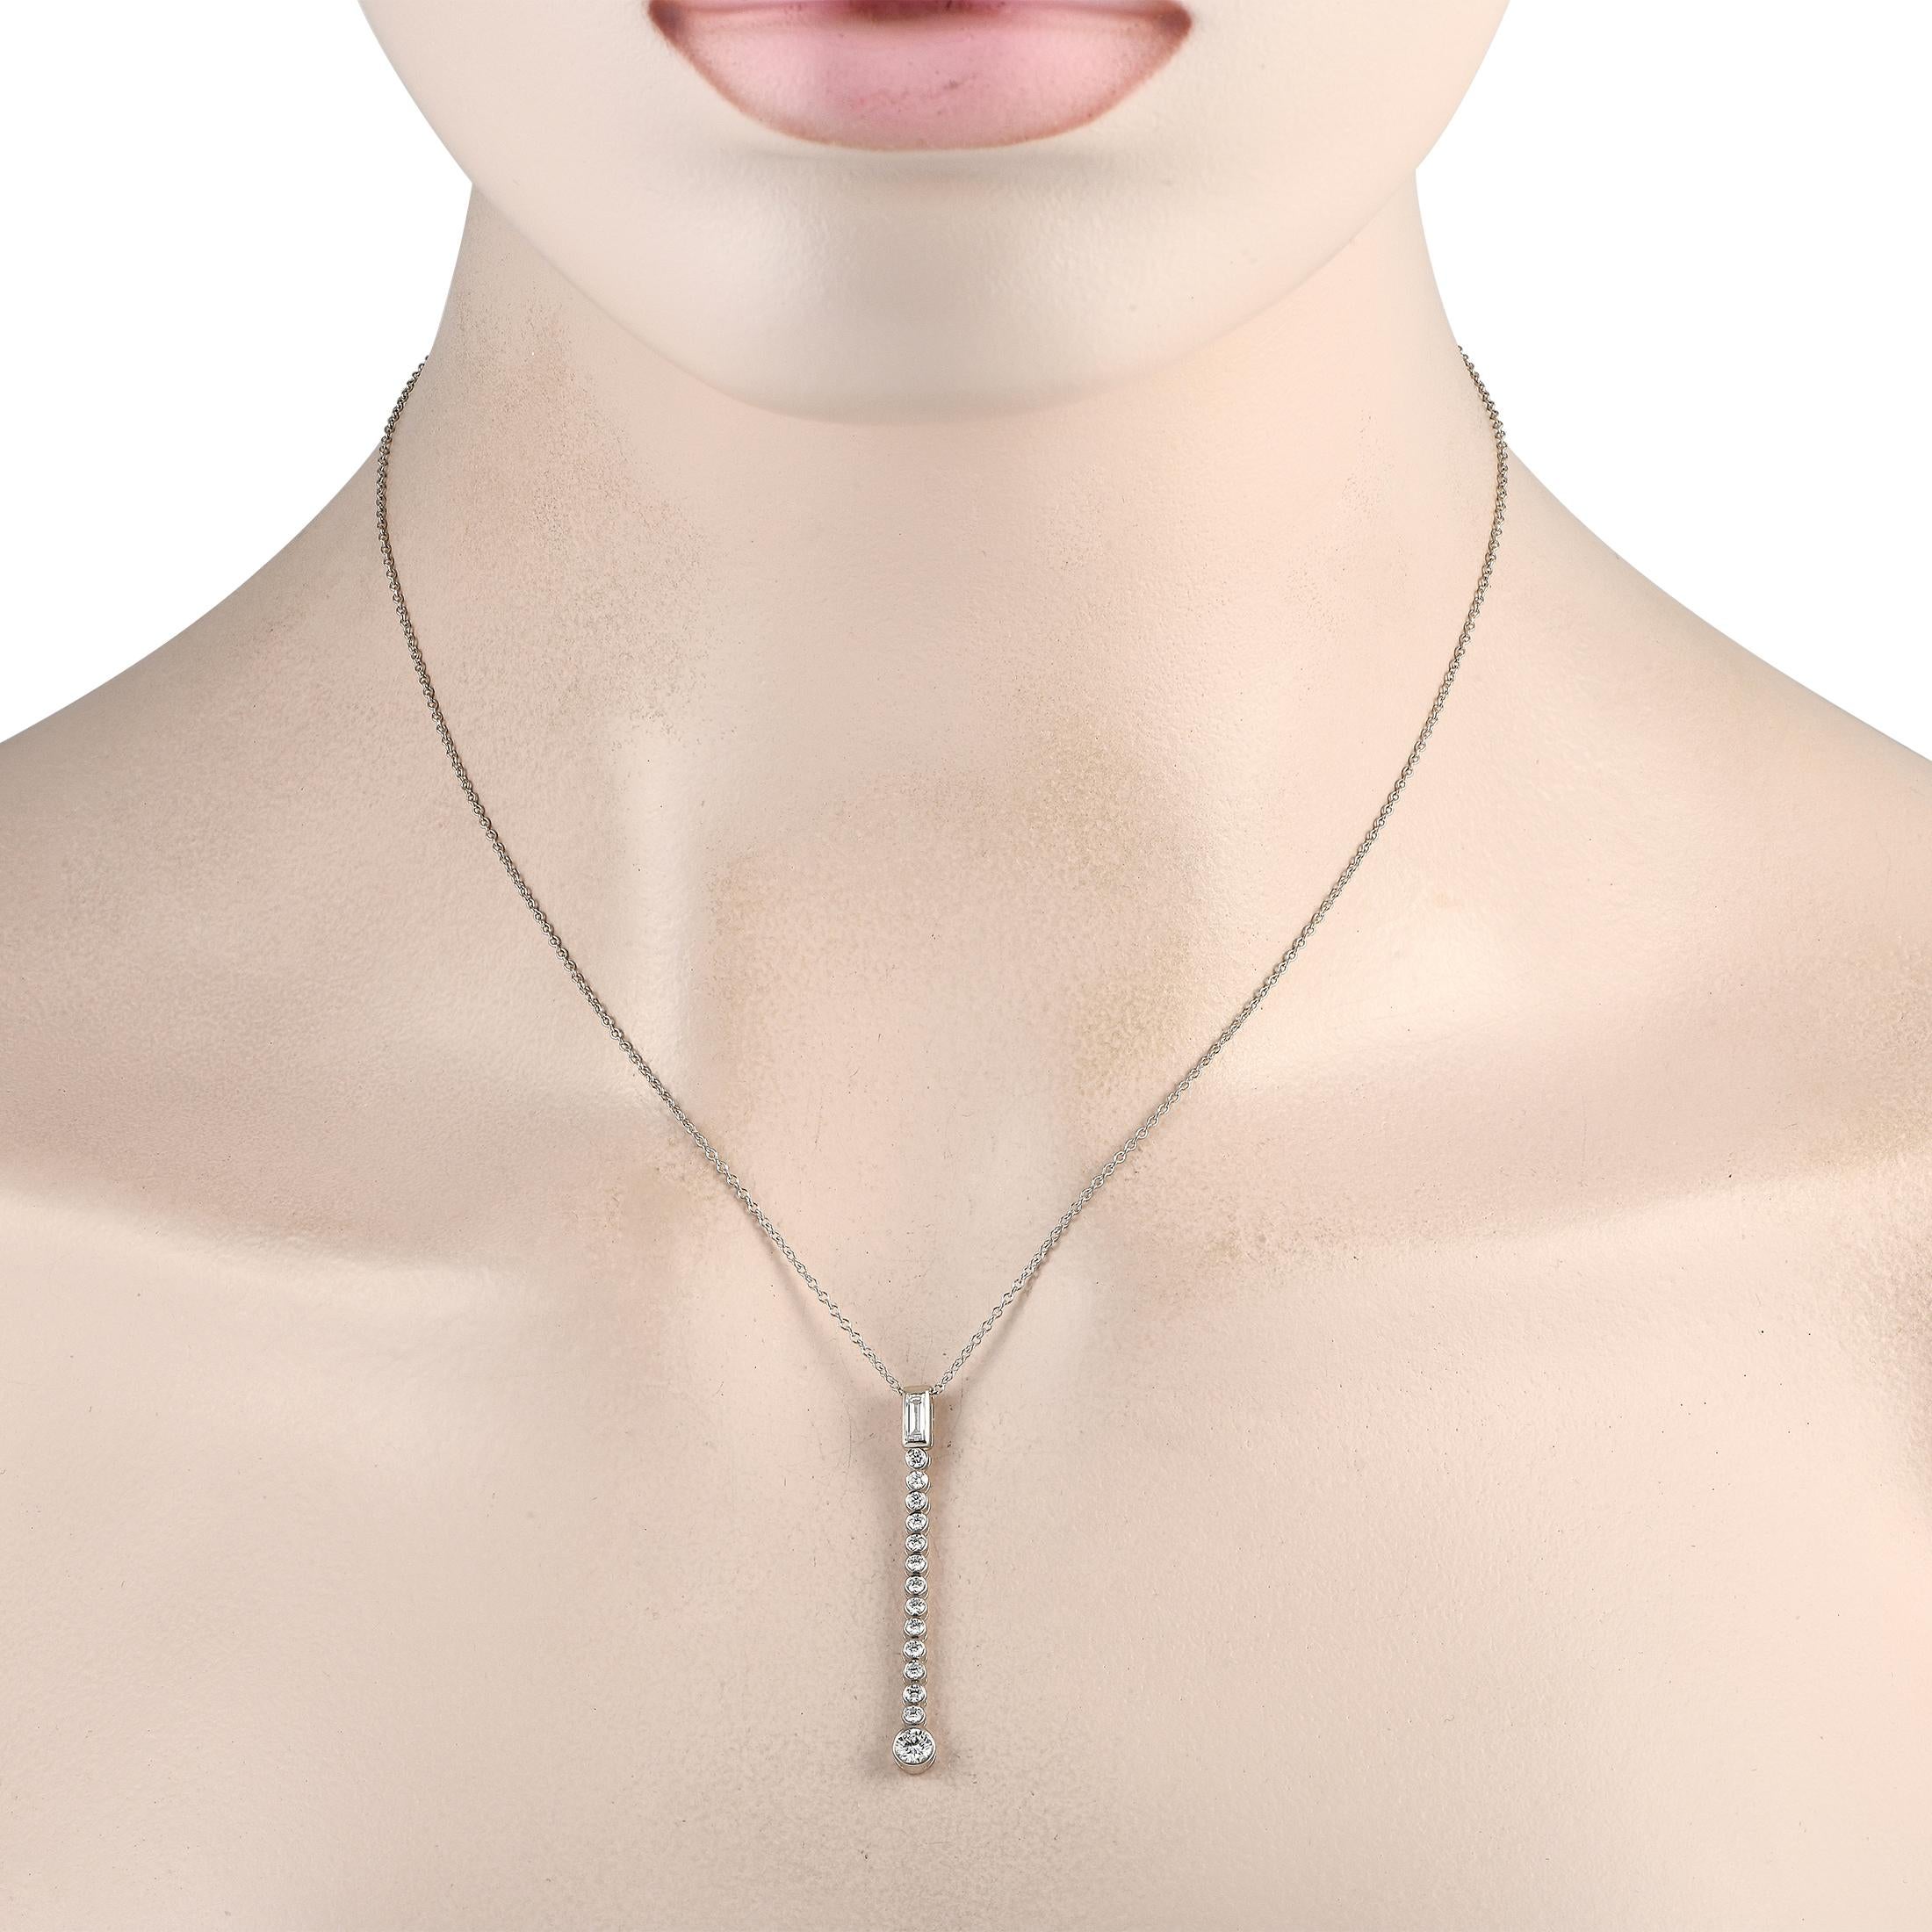 There’s something timeless about this exquisite Tiffany & Co. Jazz necklace. Shimmering Platinum beautifully elevates this piece’s series of sparkling diamonds, which together possess a total weight of 1.0 carats. The pendant is suspended from a